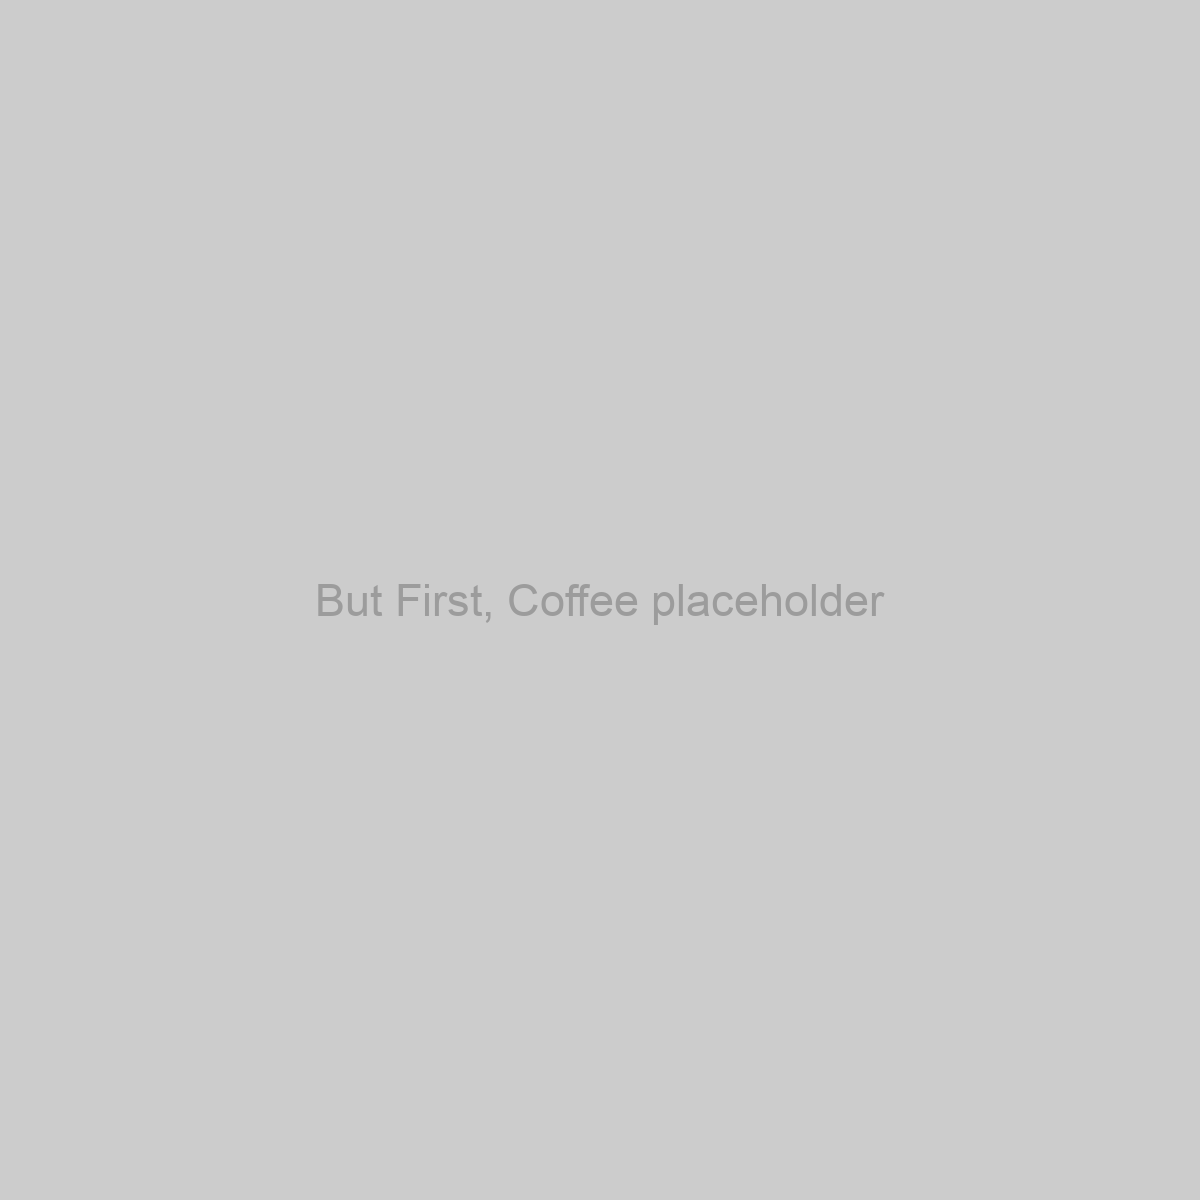 But First, Coffee Placeholder Image